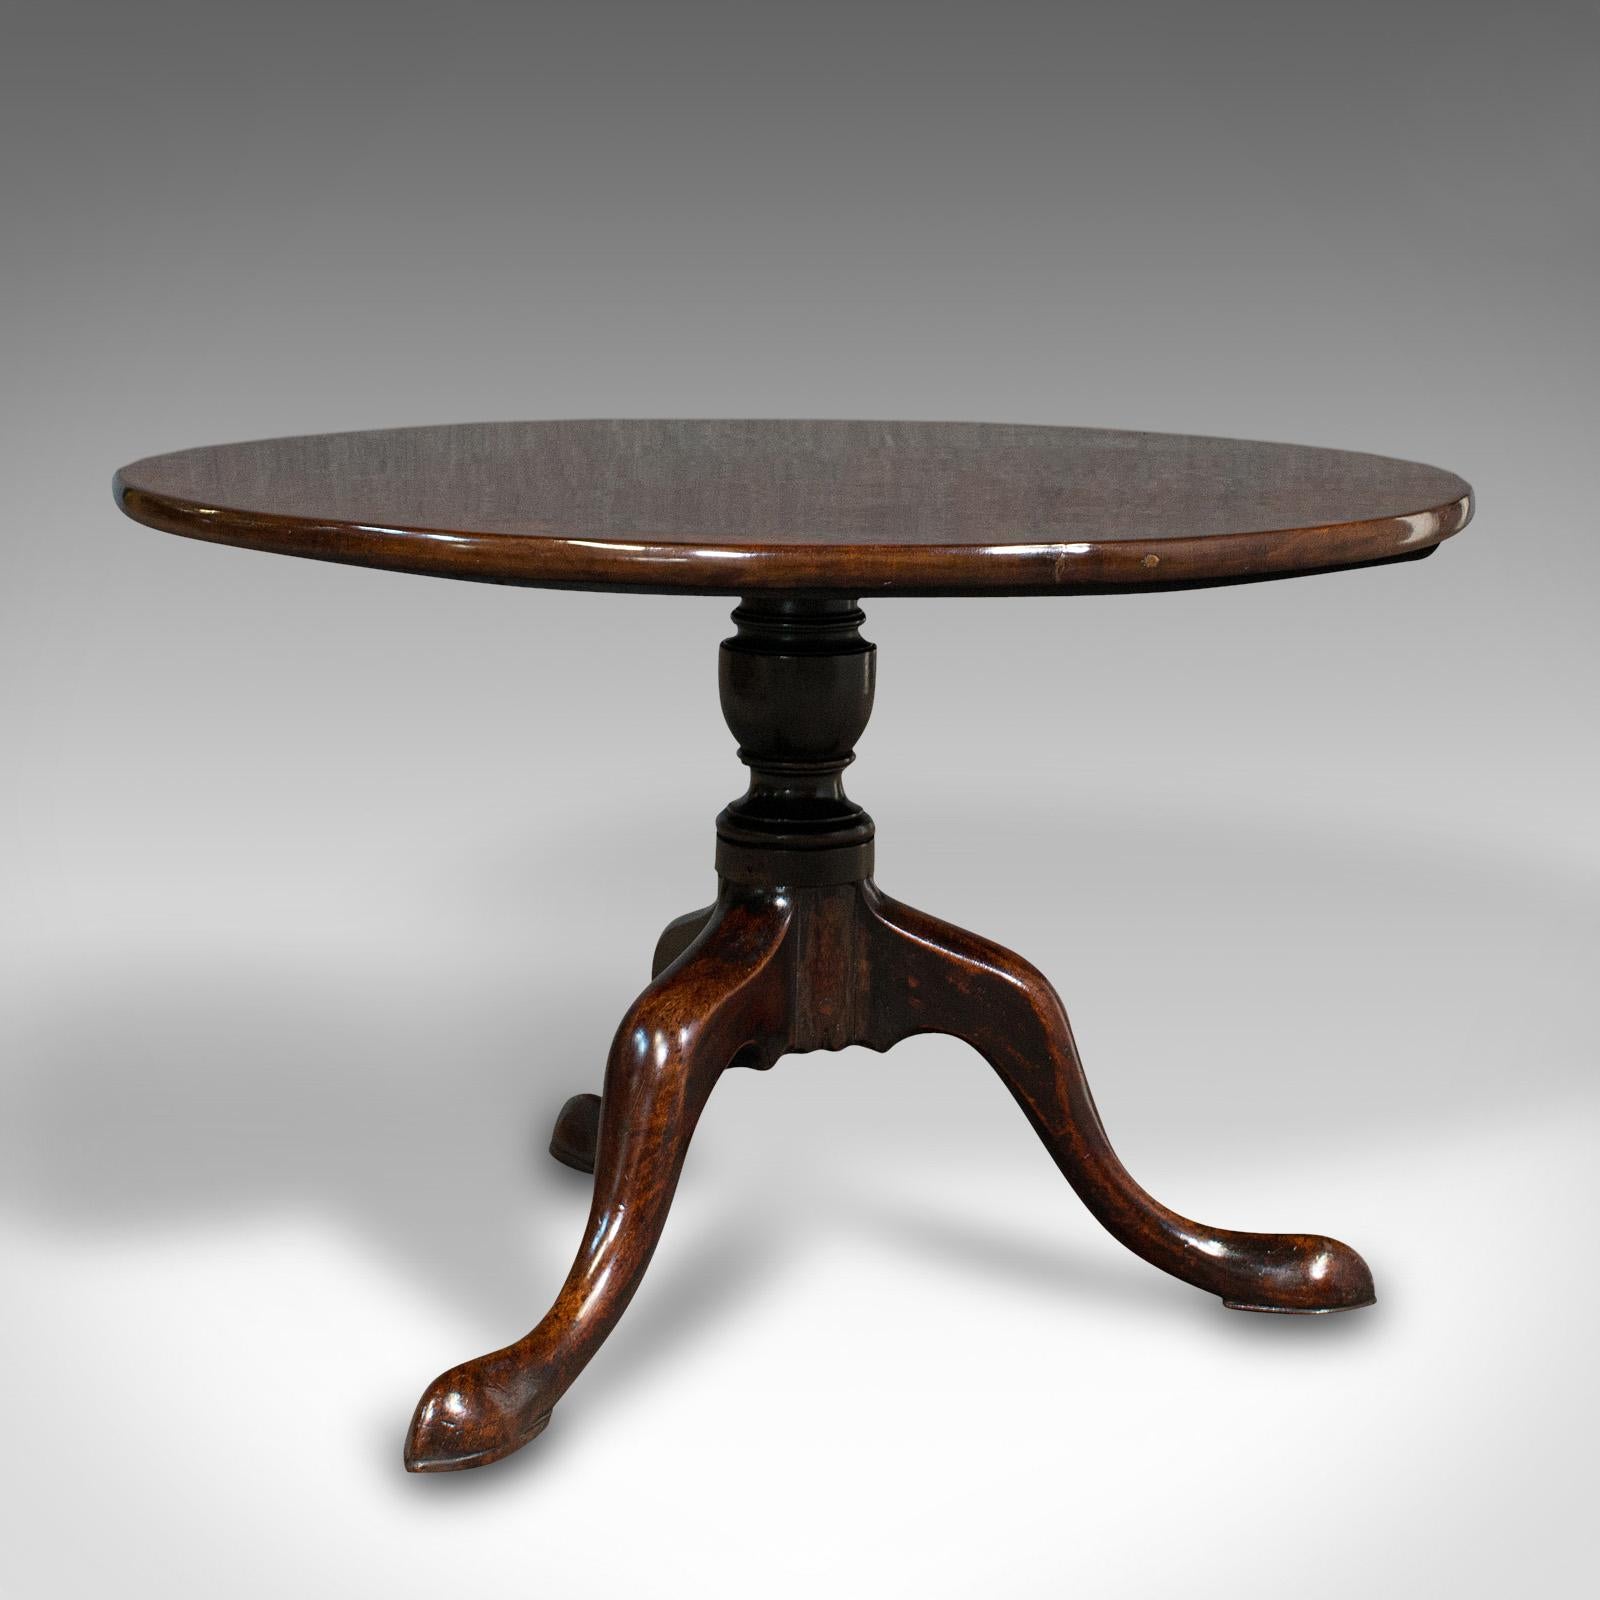 18th Century Antique Tilt Top Table, English, Wine, Afternoon Tea, Early Georgian, Circa 1750 For Sale